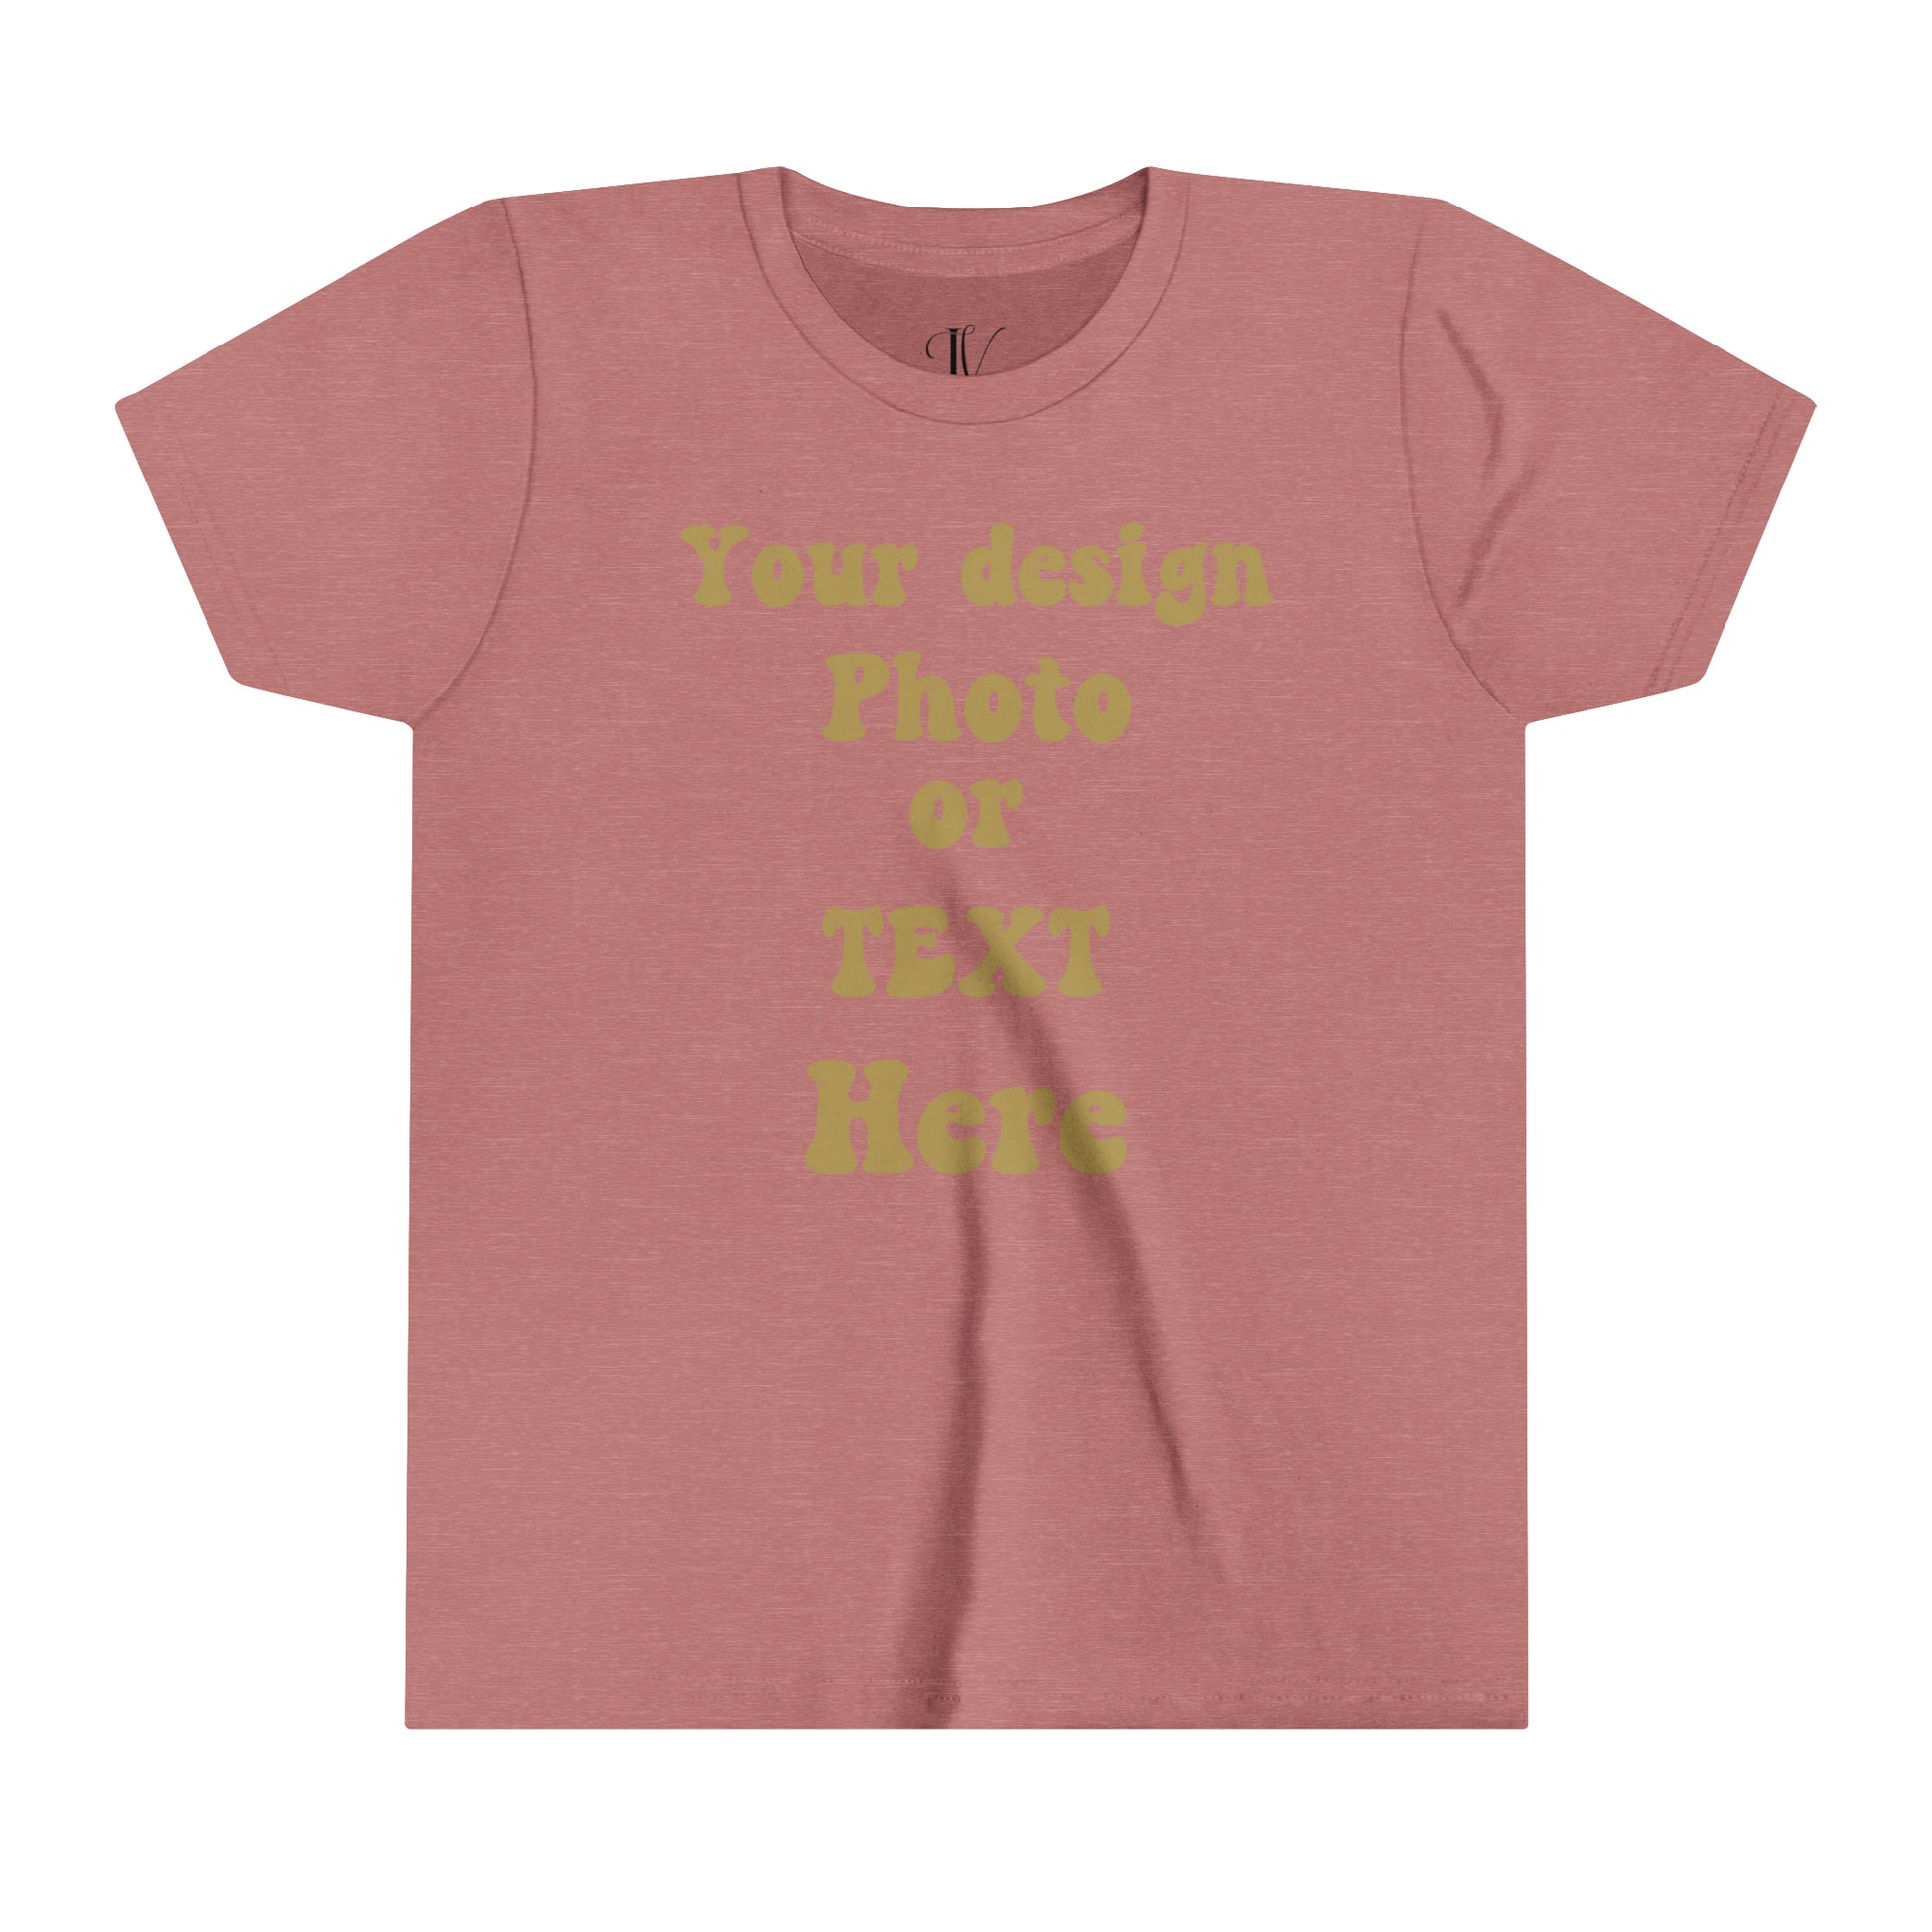 Youth Short Sleeve Tee - Personalized with Your Photo, Text, and Design Kids clothes Heather Mauve S 